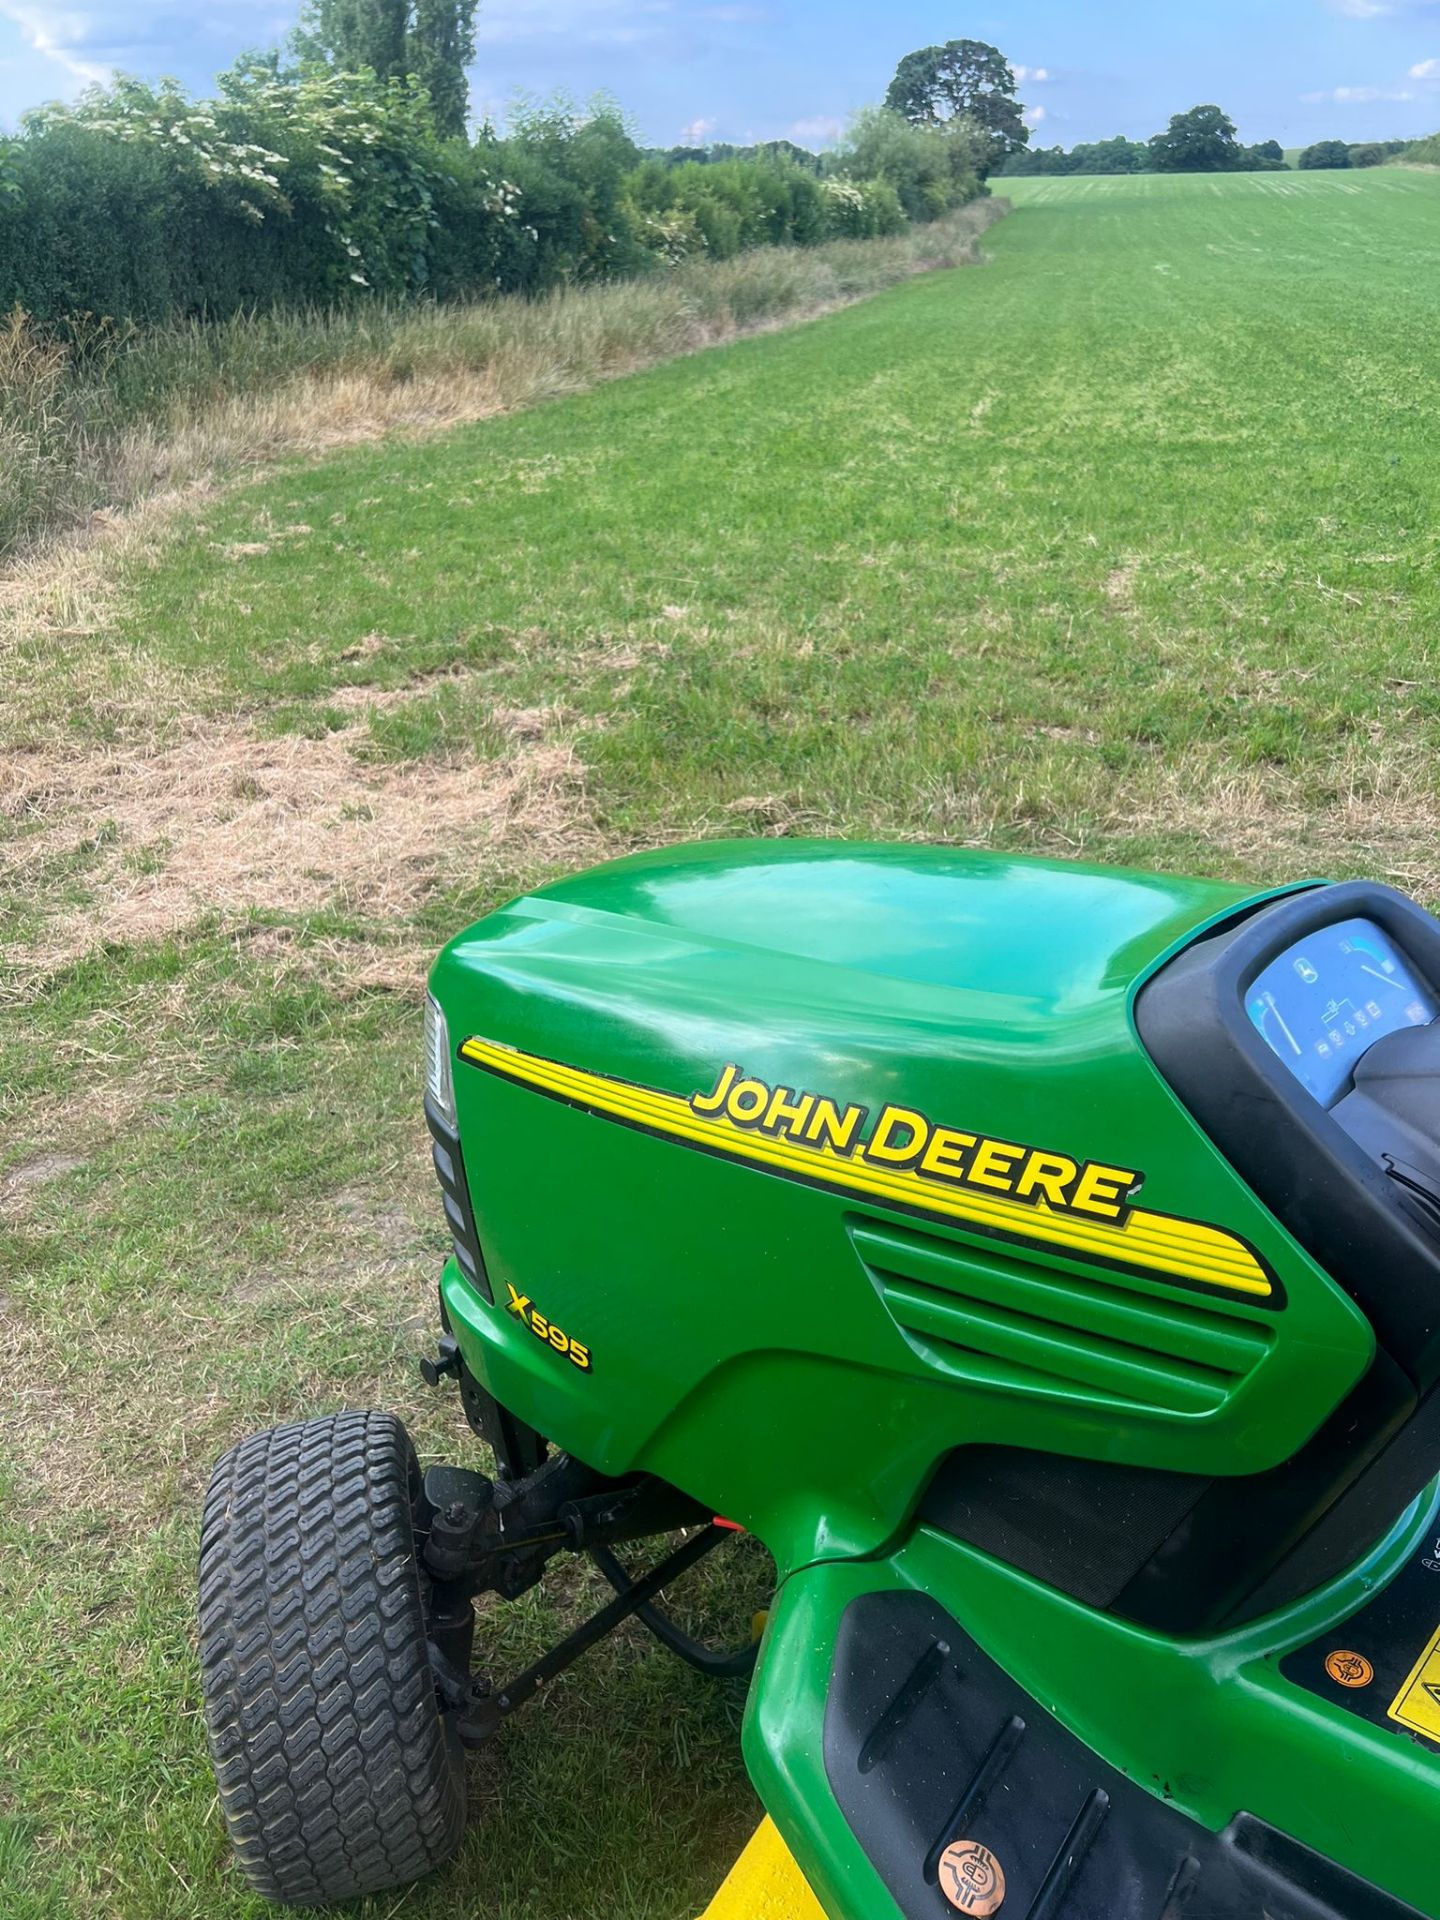 JOHN DEERE X495 RIDE ON LAWN MOWER WITH COLLECTOR *PLUS VAT* - Image 5 of 6